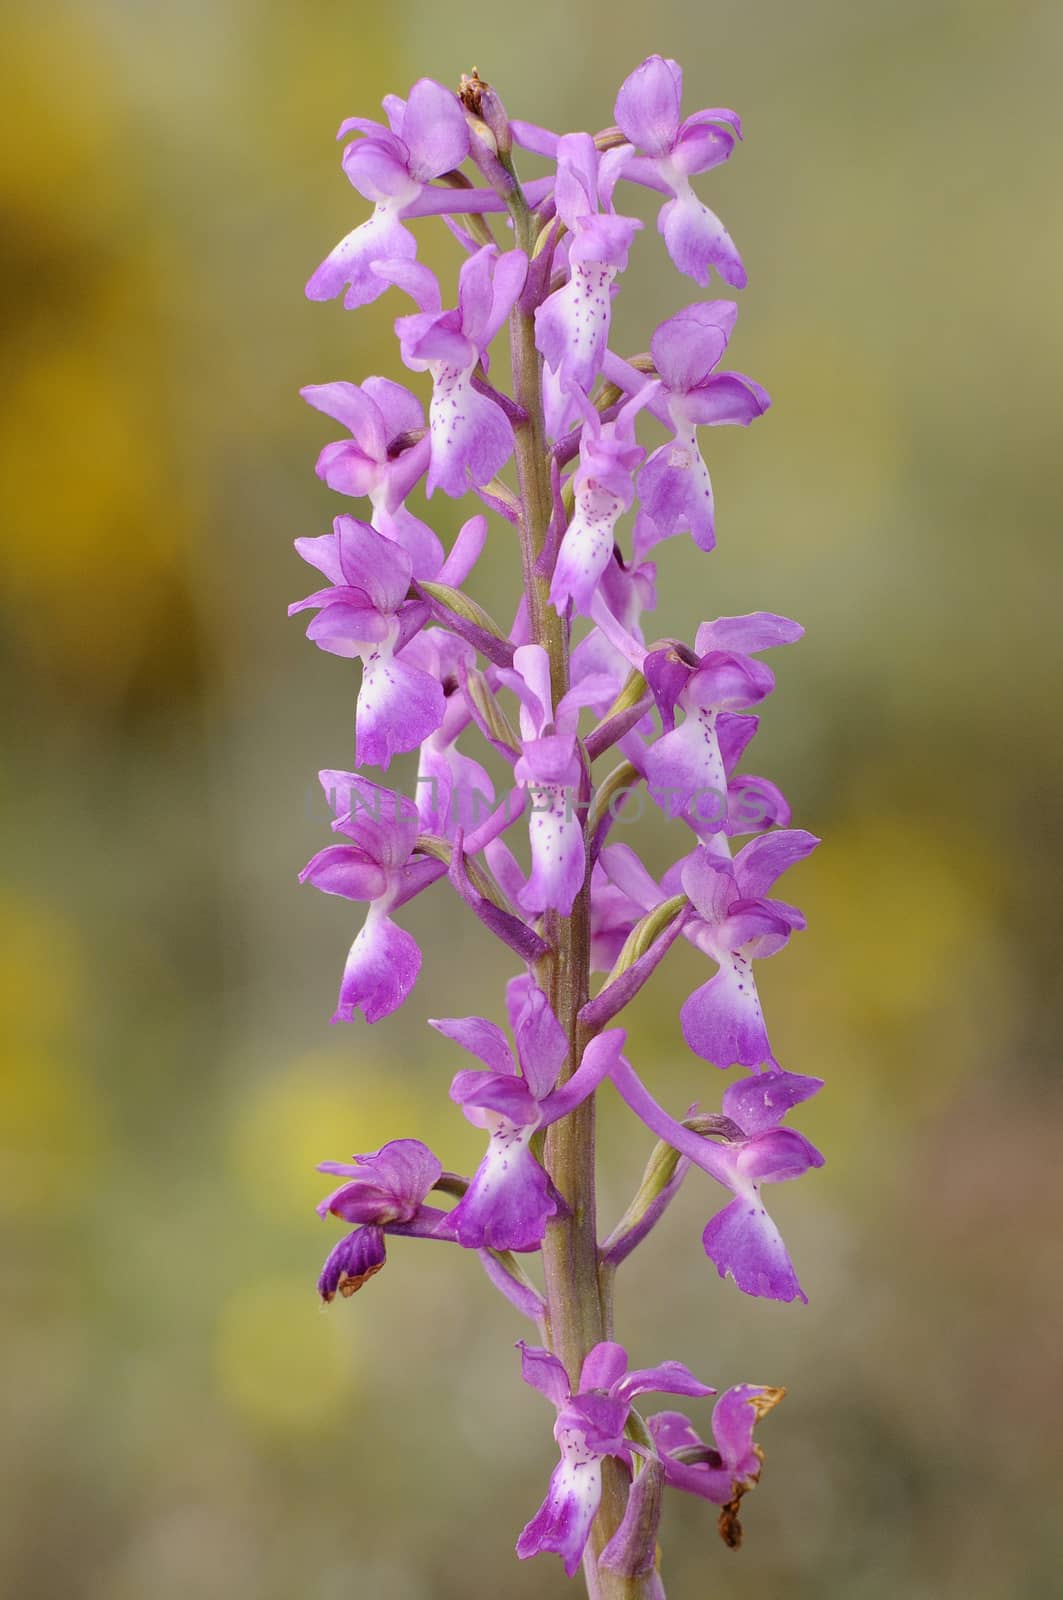 Wild orchid from southern Western Europe, Purple Orchid (Orchis  by jalonsohu@gmail.com